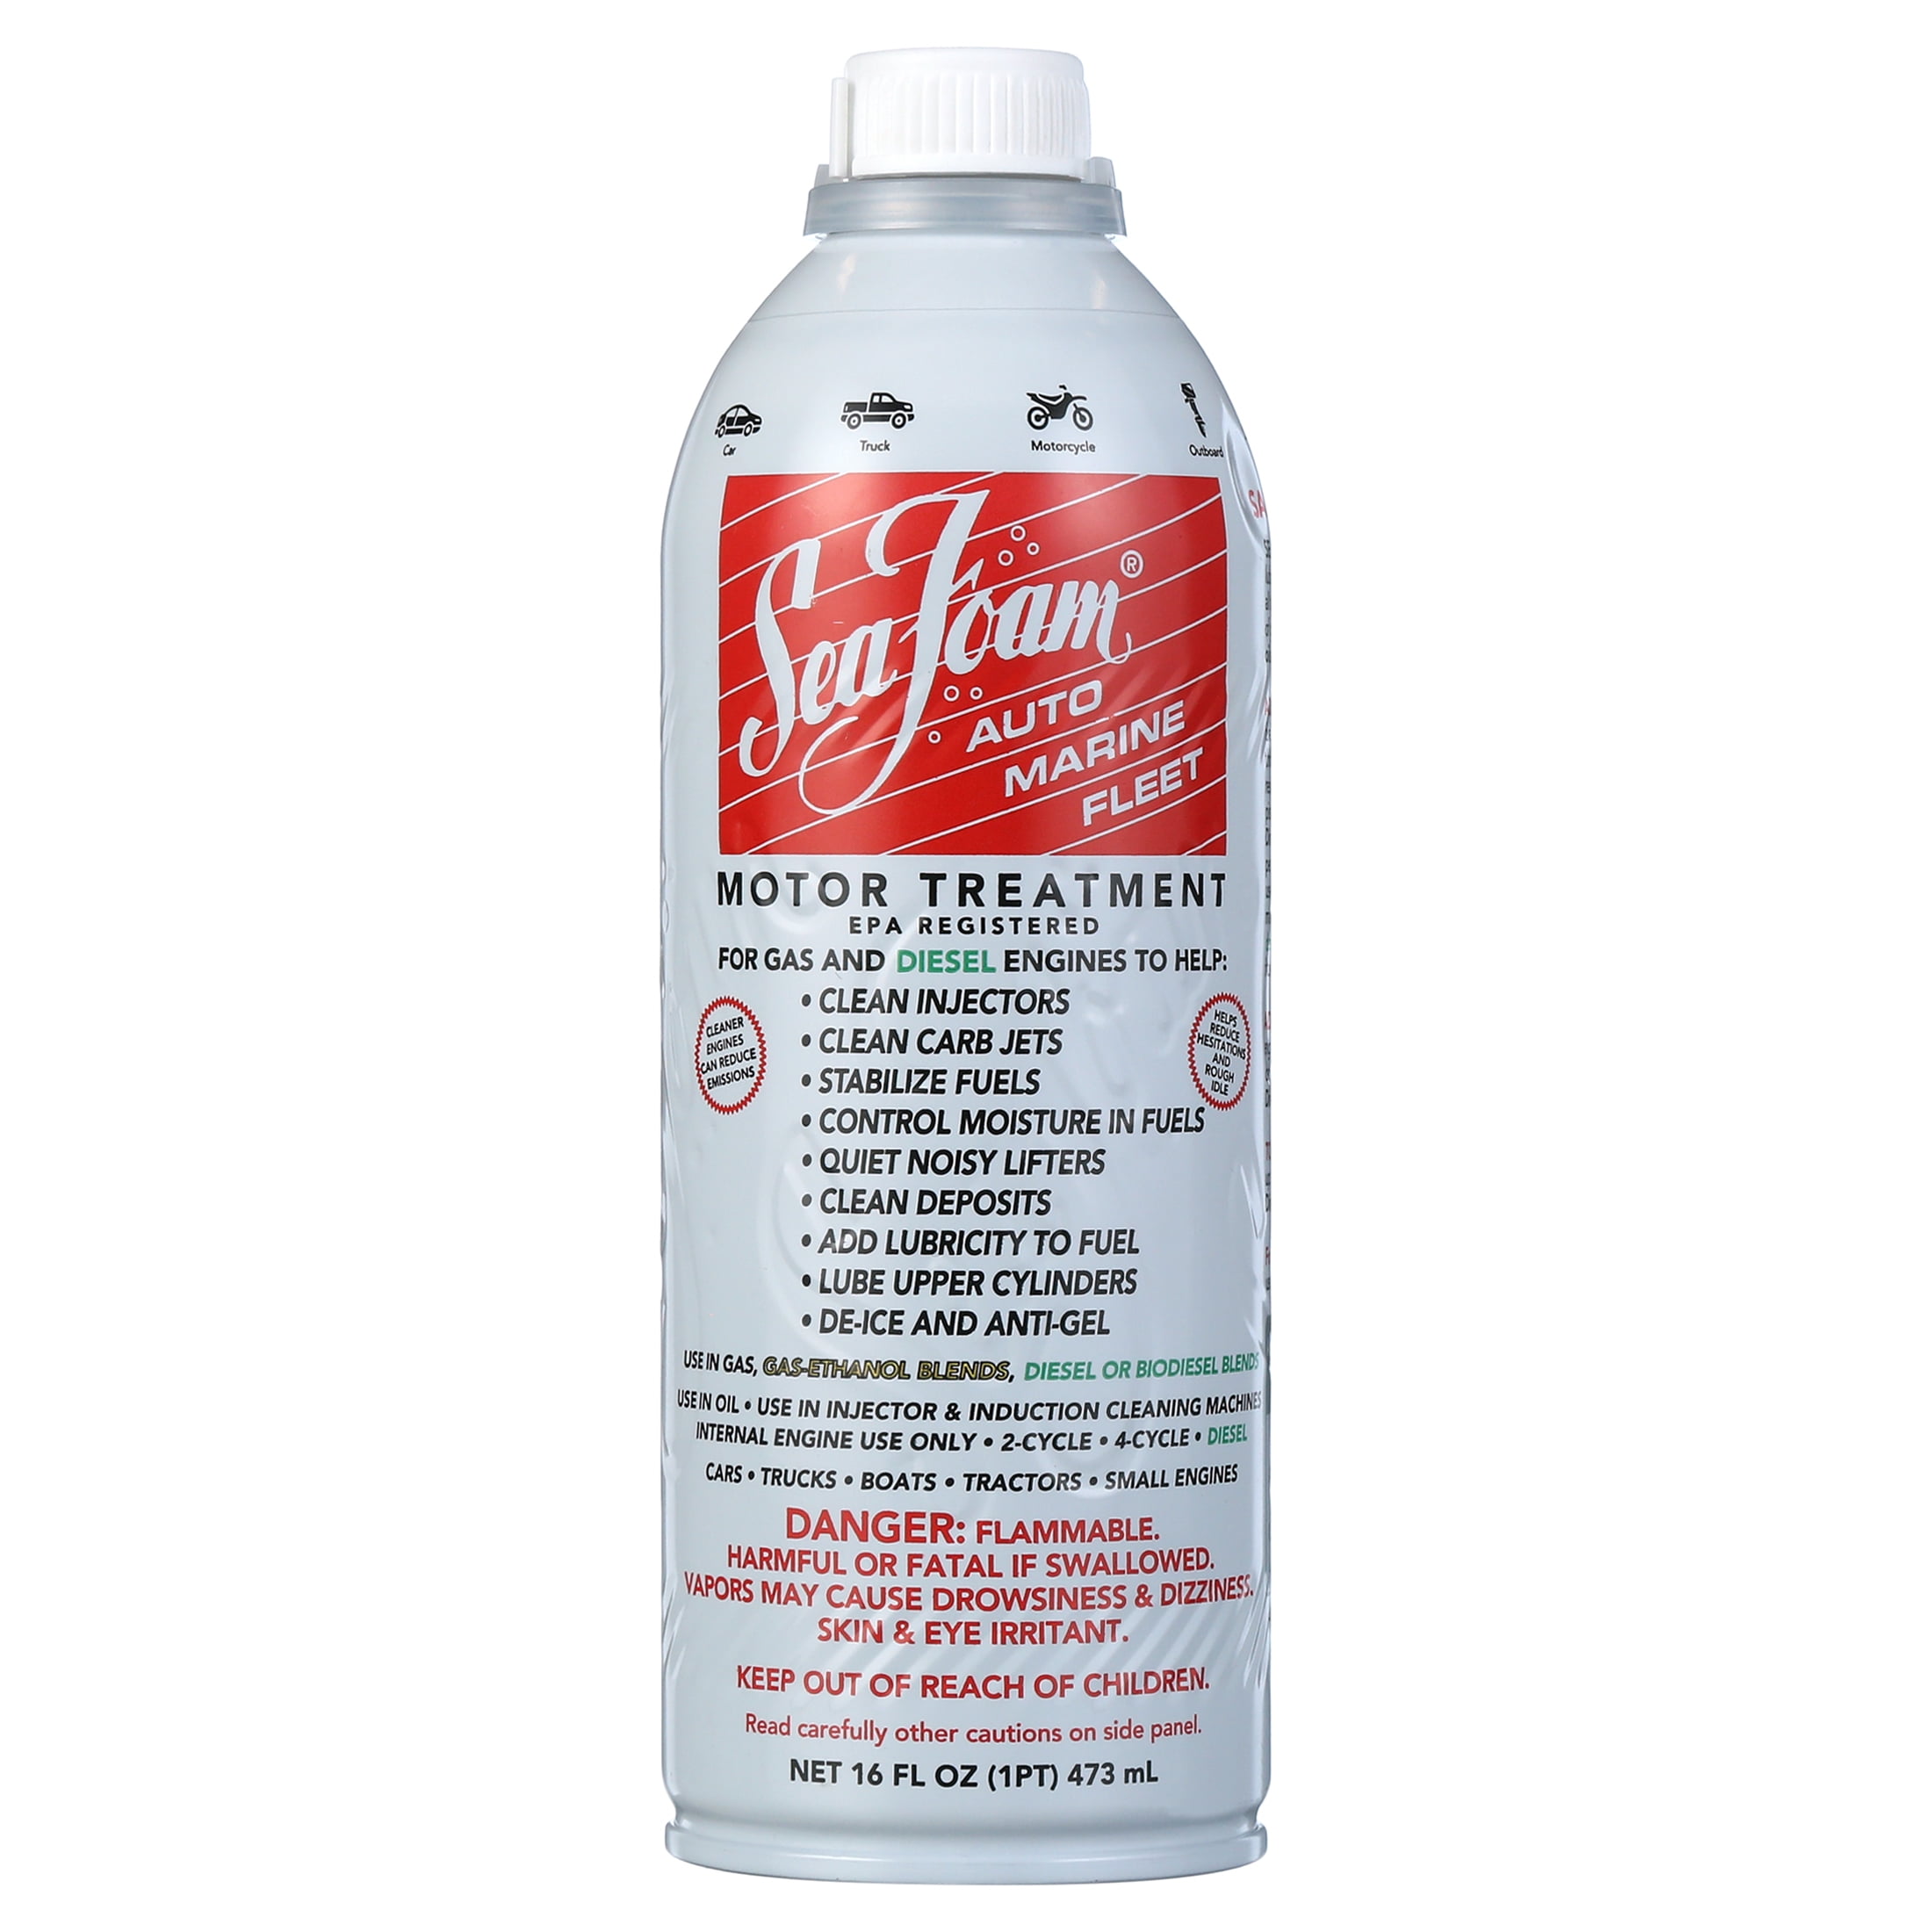 Does Seafoam Carb Cleaner Really Work